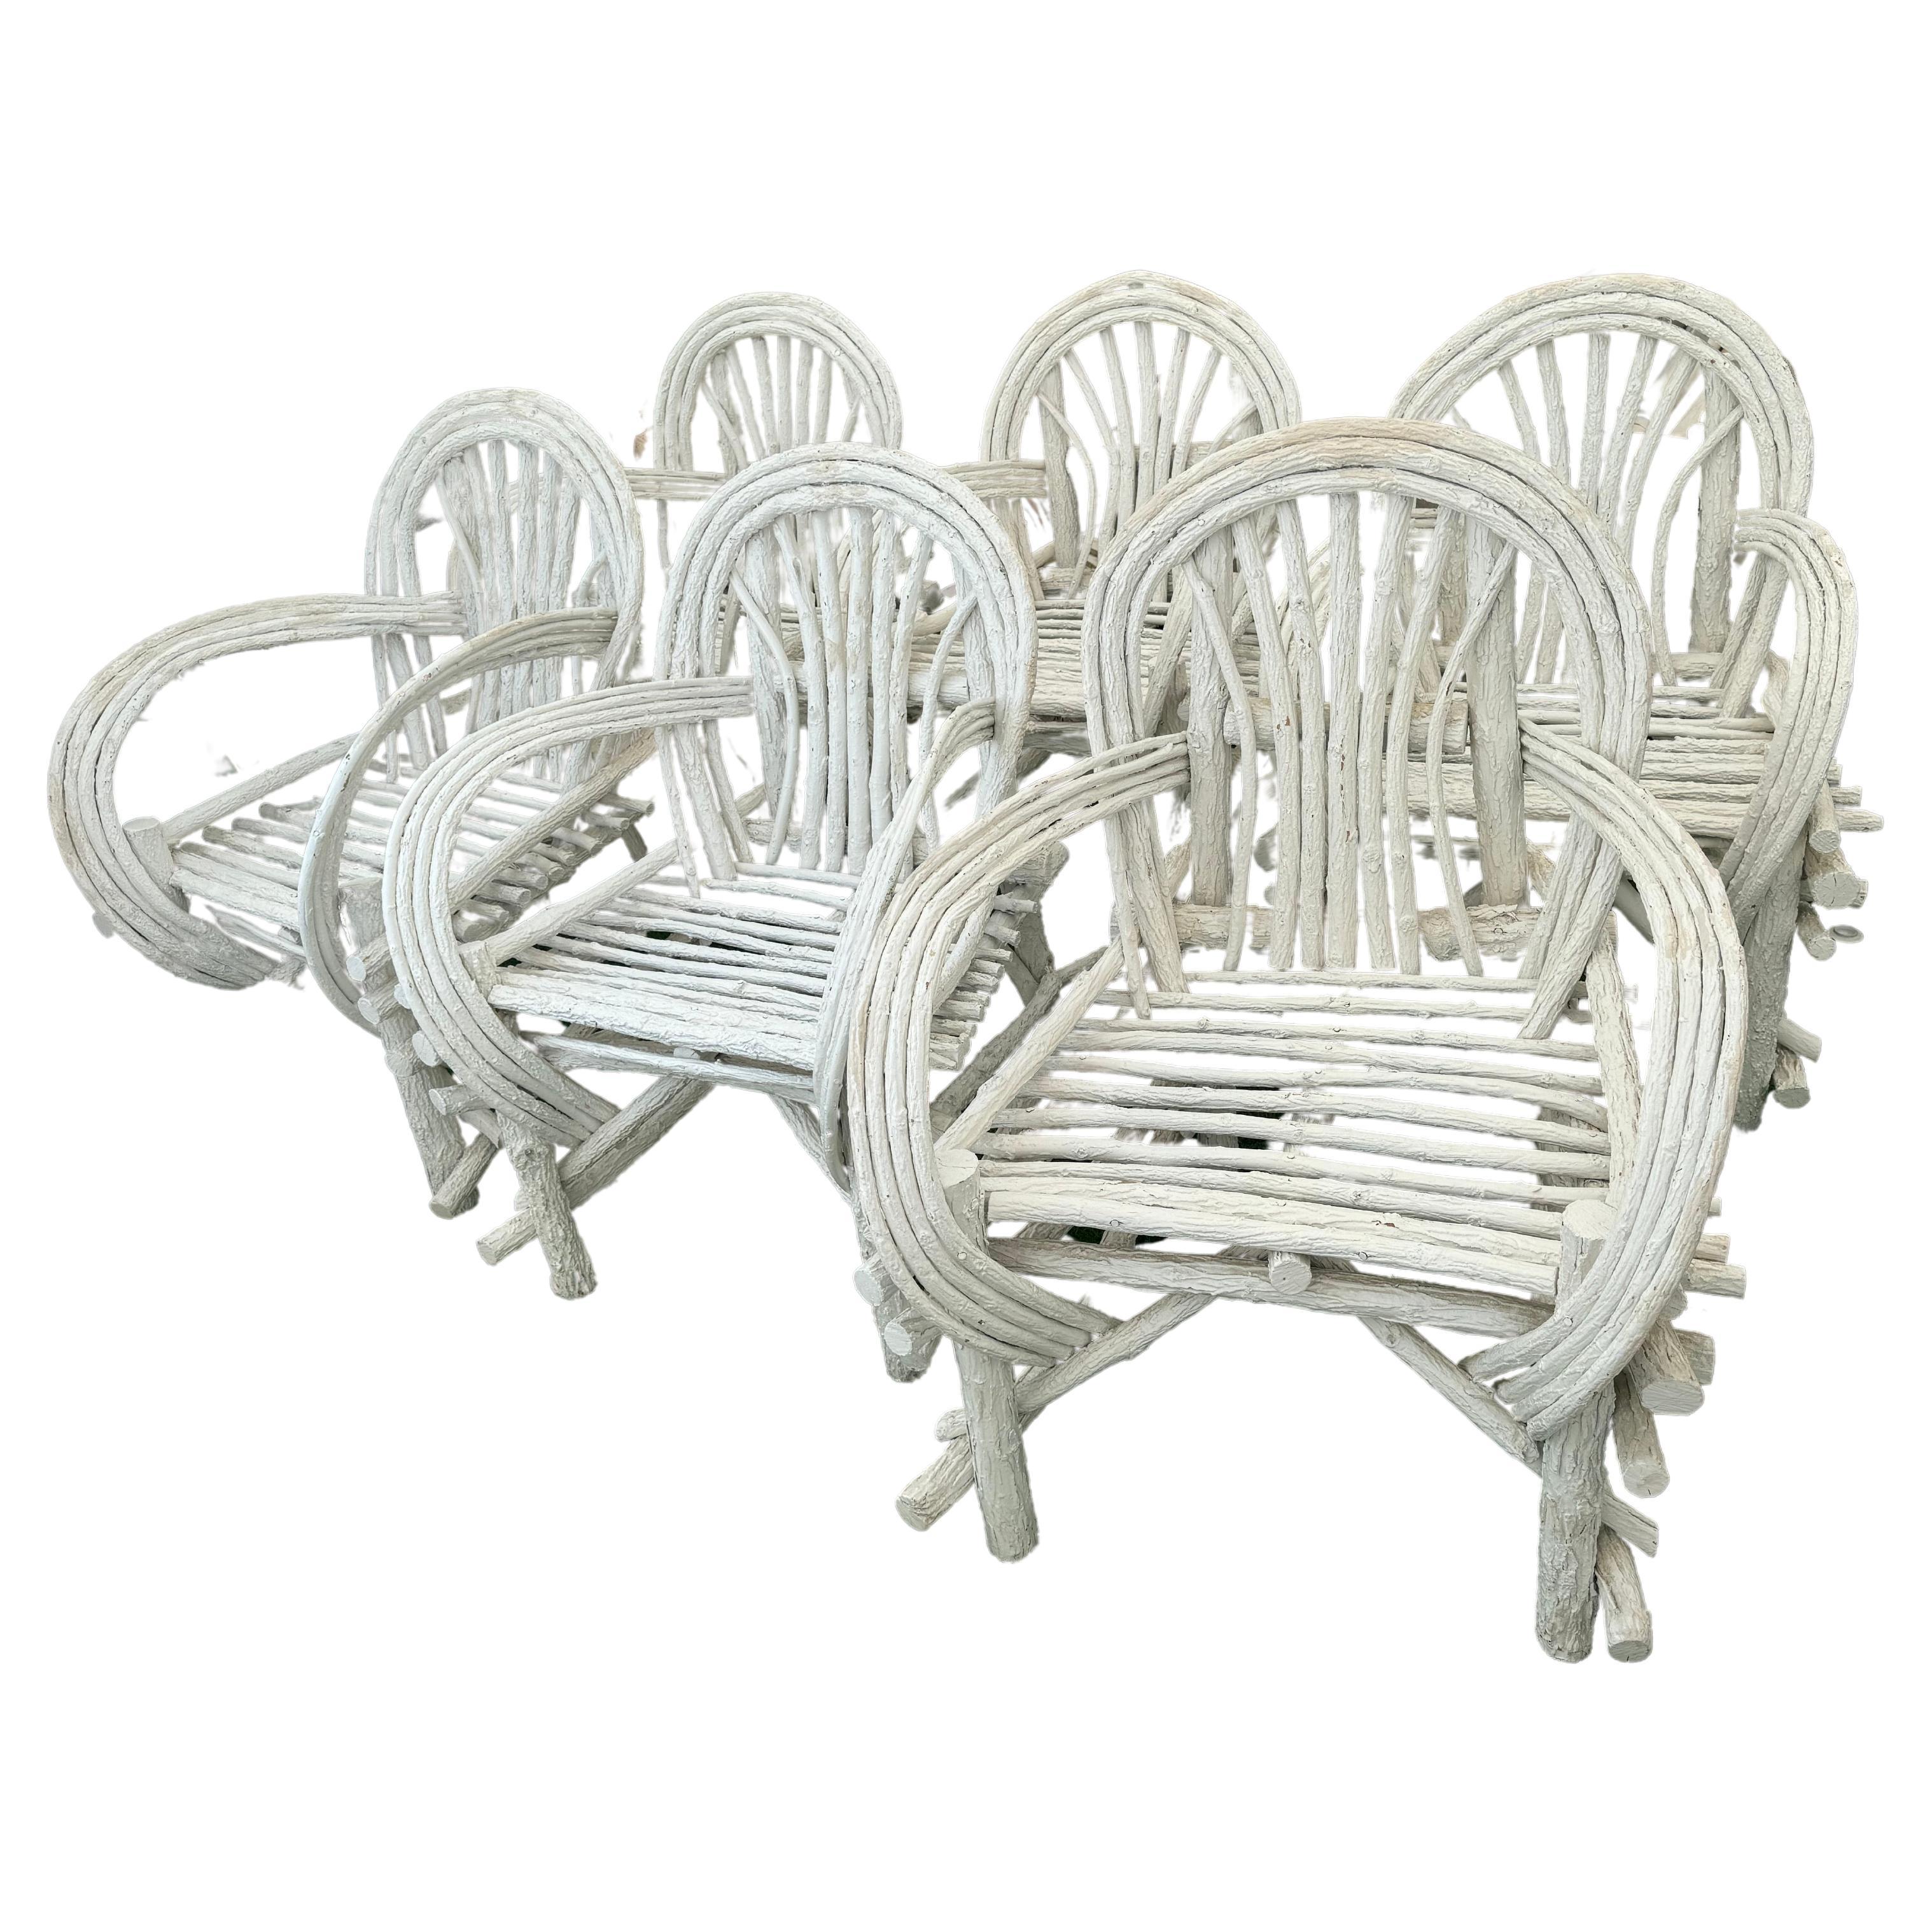 Adirondack / Twig Chairs  For Sale